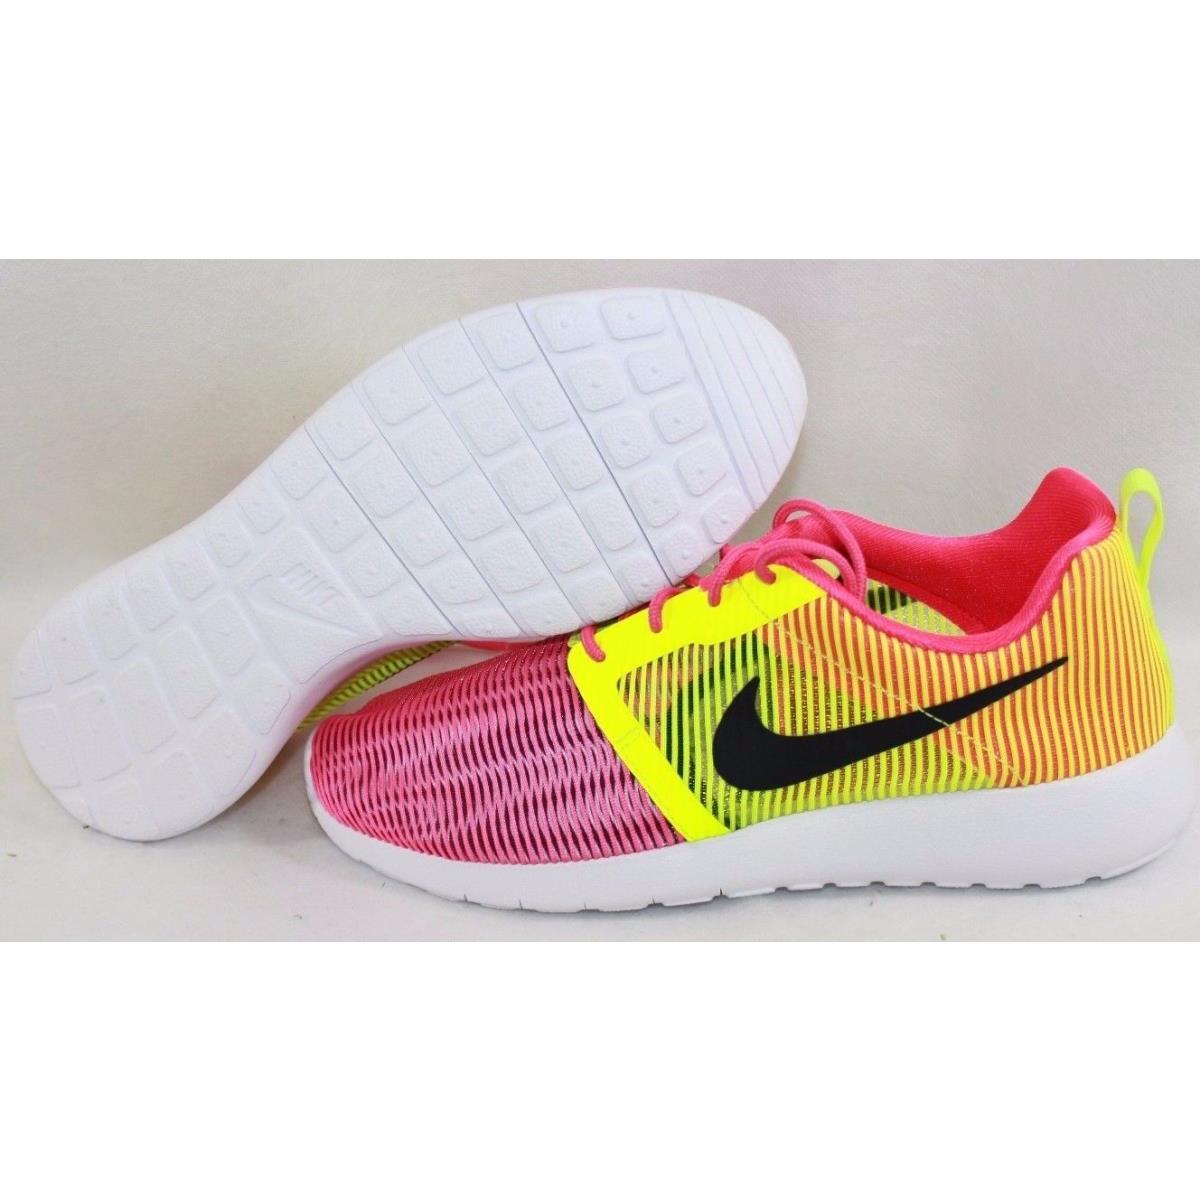 Girls Kids Youth Nike Roshe One Flight Weight 705486 603 Pink Sneakers Shoes